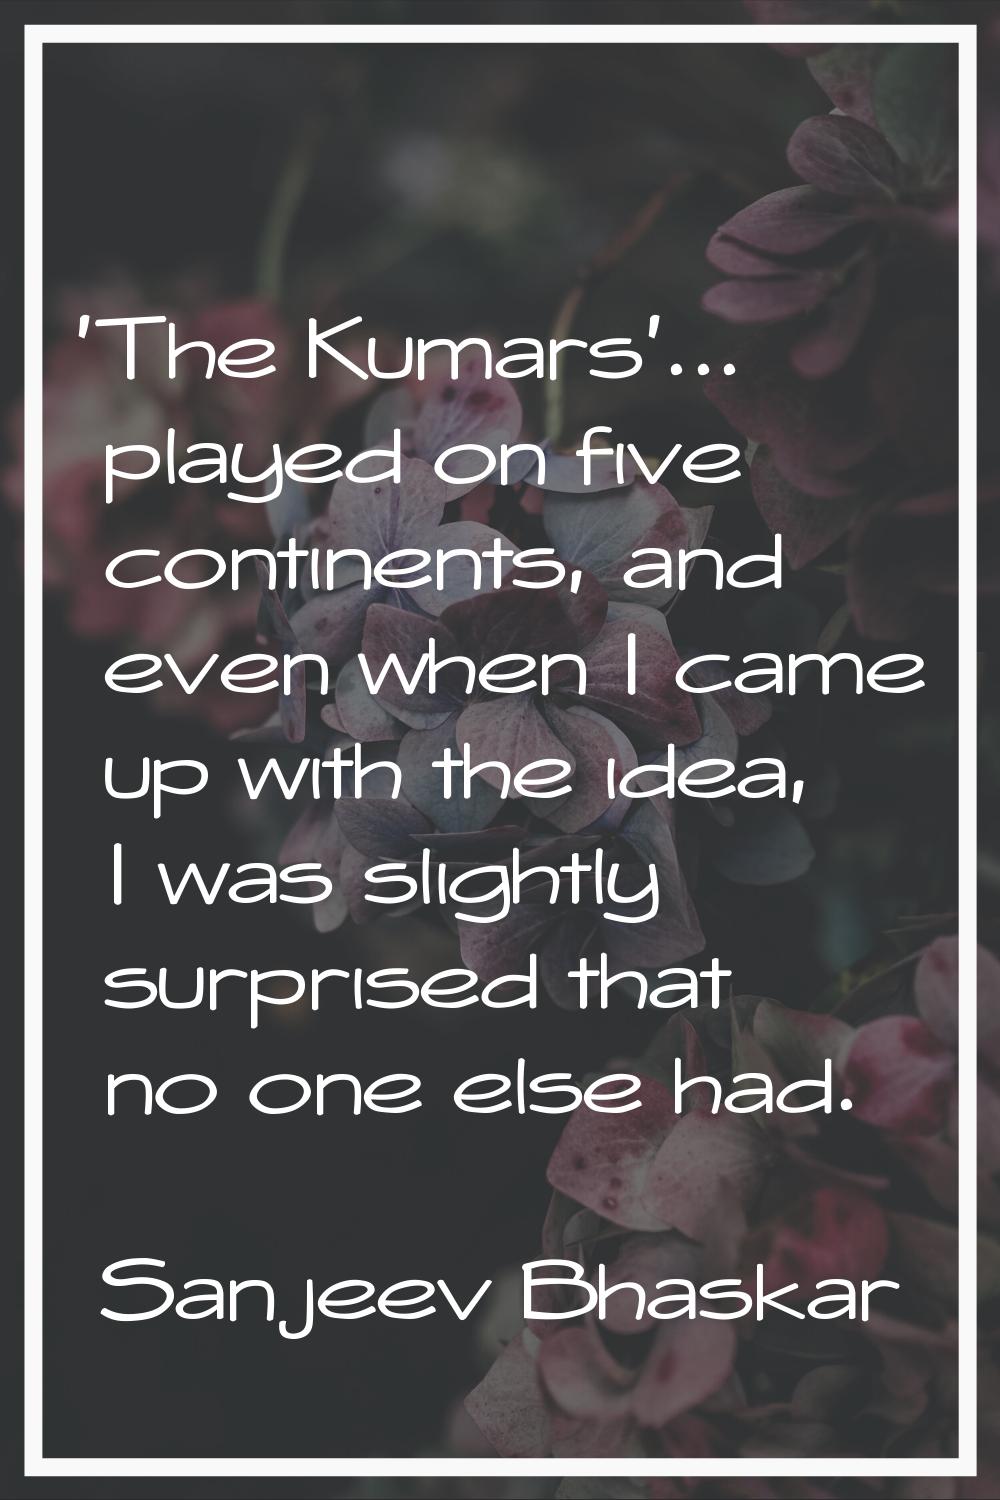 'The Kumars'... played on five continents, and even when I came up with the idea, I was slightly su